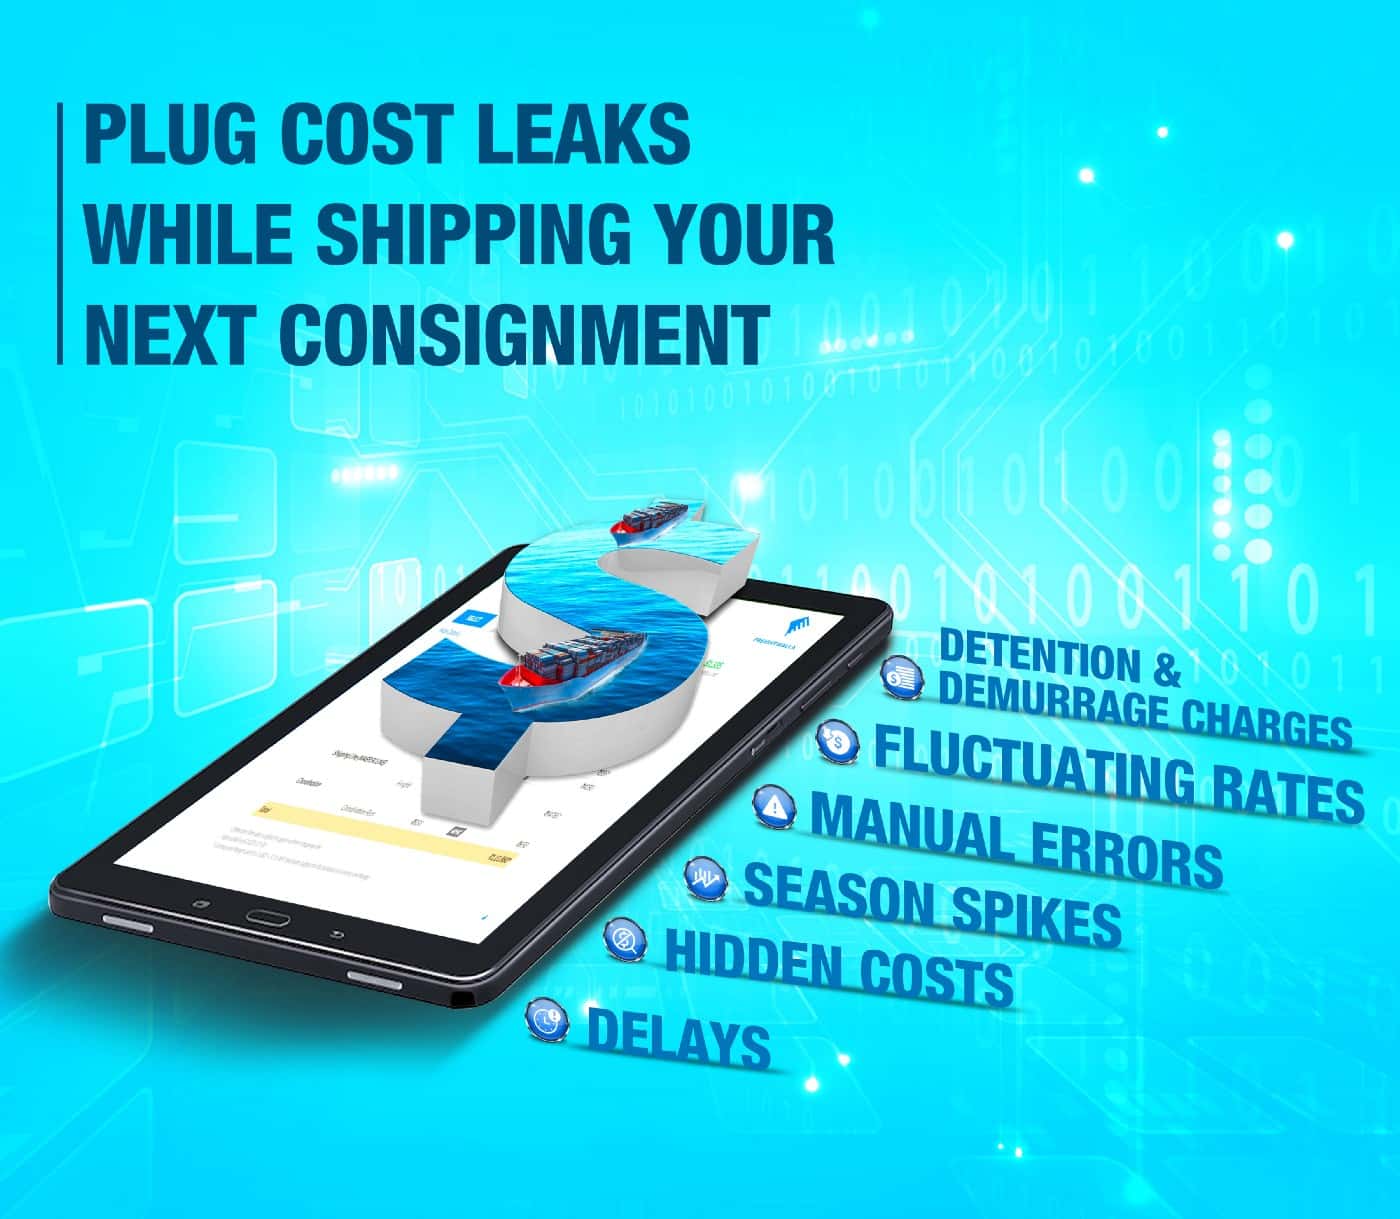 Plugging Cost Leaks Before Shipping Your Consignment